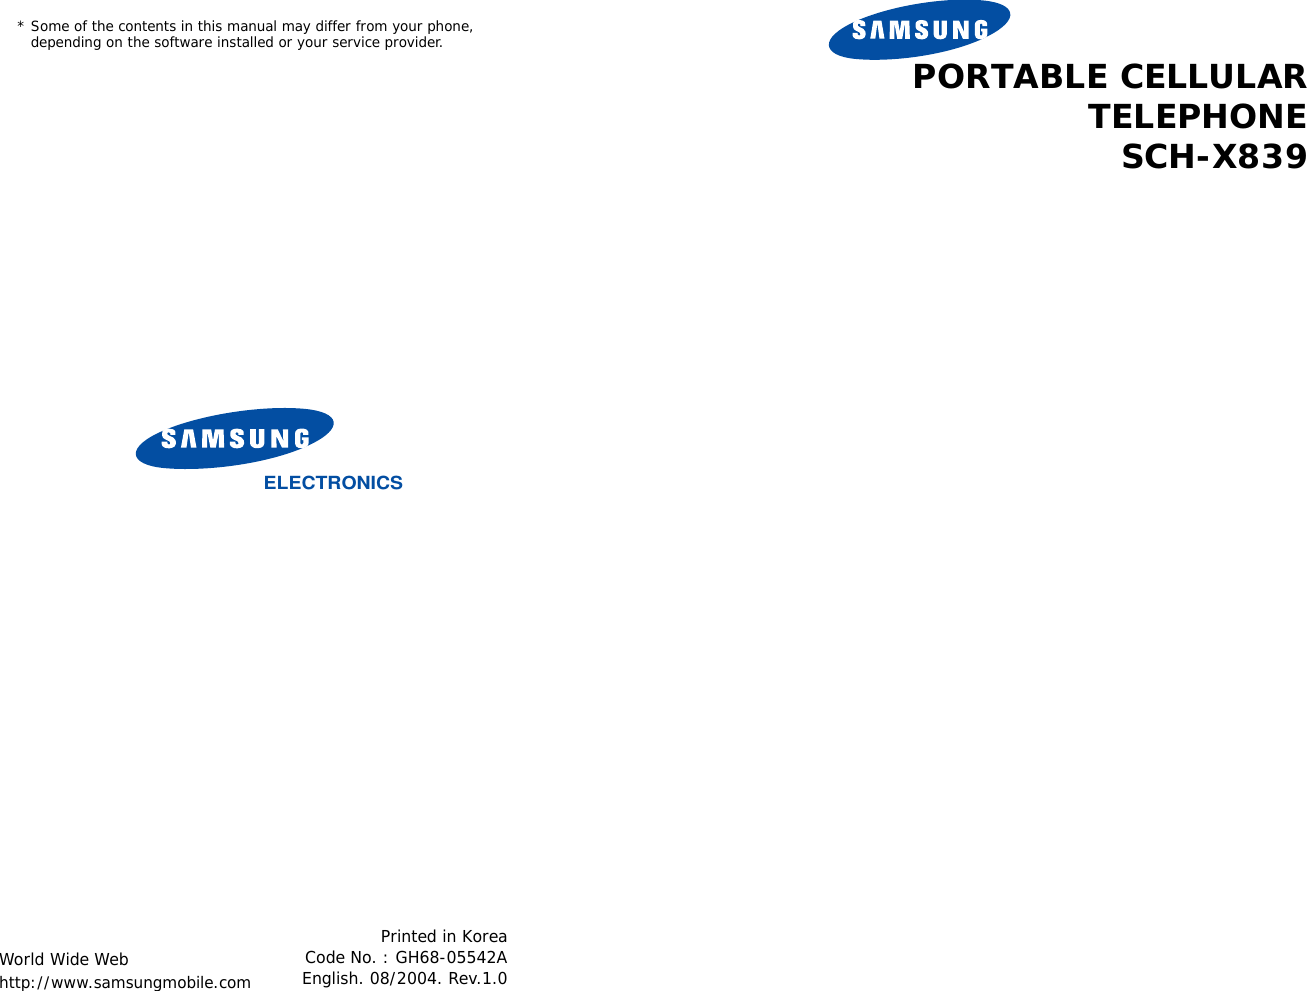 * Some of the contents in this manual may differ from your phone,   depending on the software installed or your service provider.World Wide Webhttp://www.samsungmobile.comPrinted in KoreaCode No. : GH68-05542AEnglish. 08/2004. Rev.1.0ELECTRONICSPORTABLE CELLULARTELEPHONESCH-X839